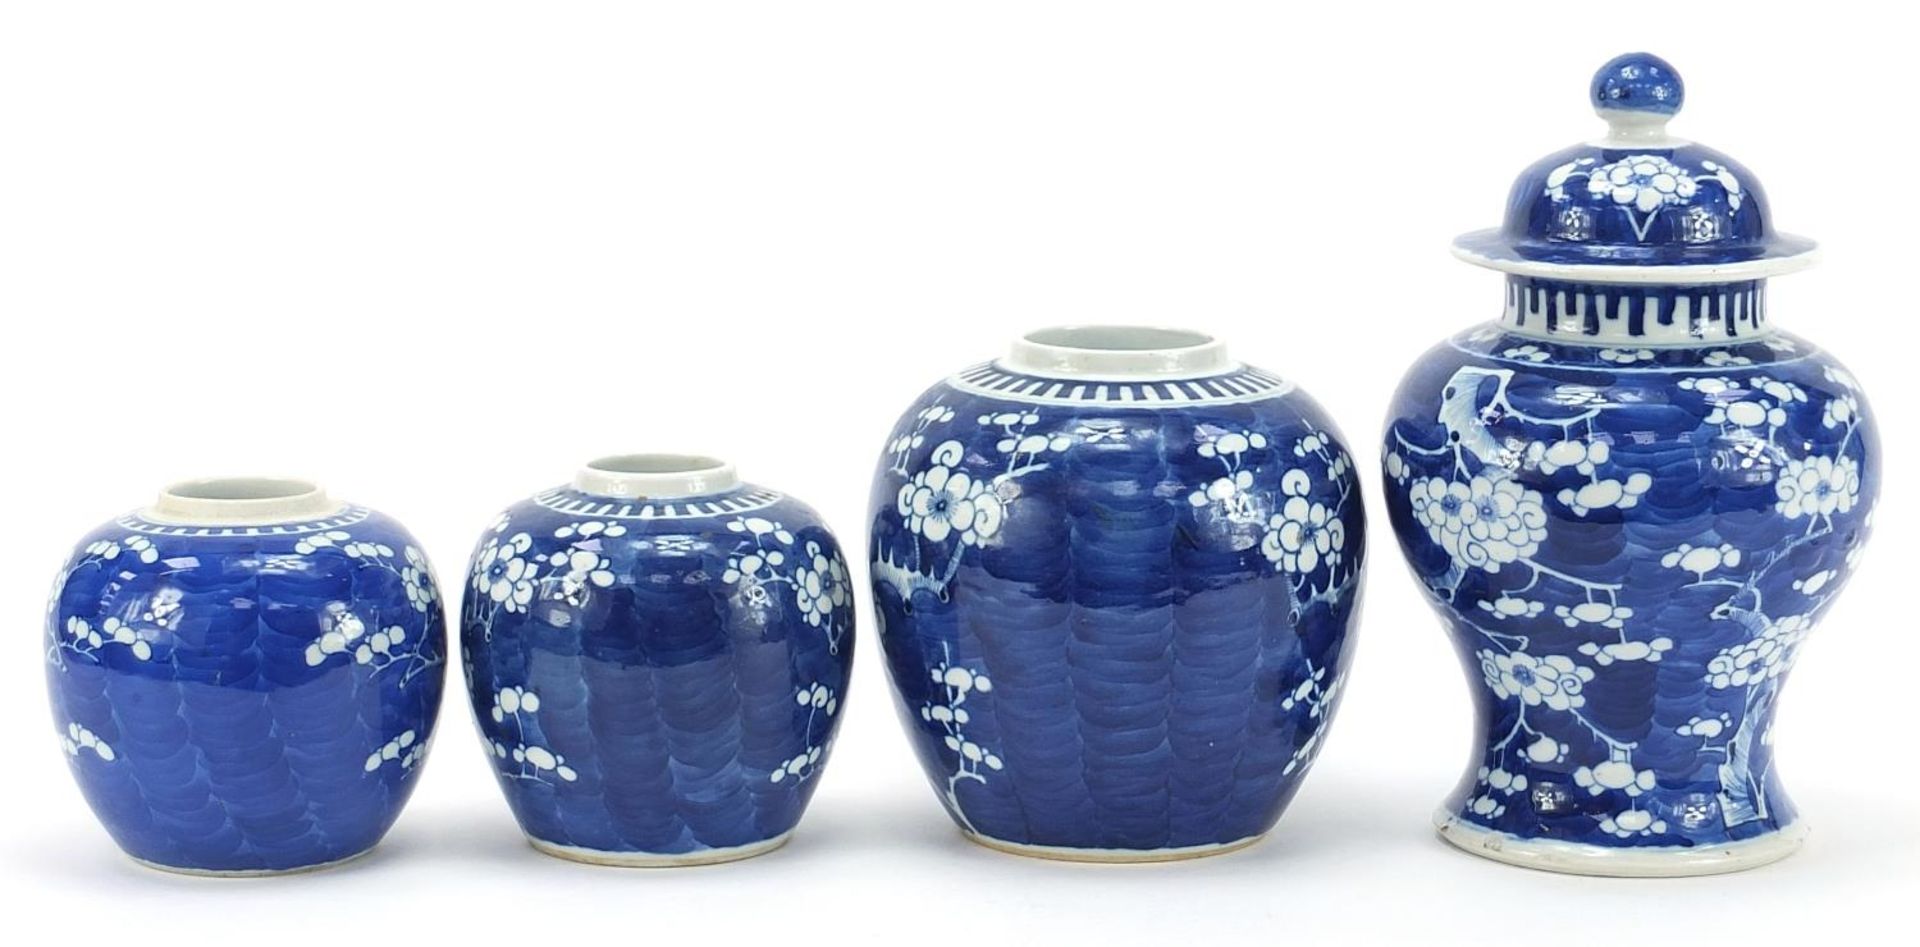 Chinese blue and white porcelain hand painted with prunus flowers, comprising a baluster vase with - Image 4 of 7